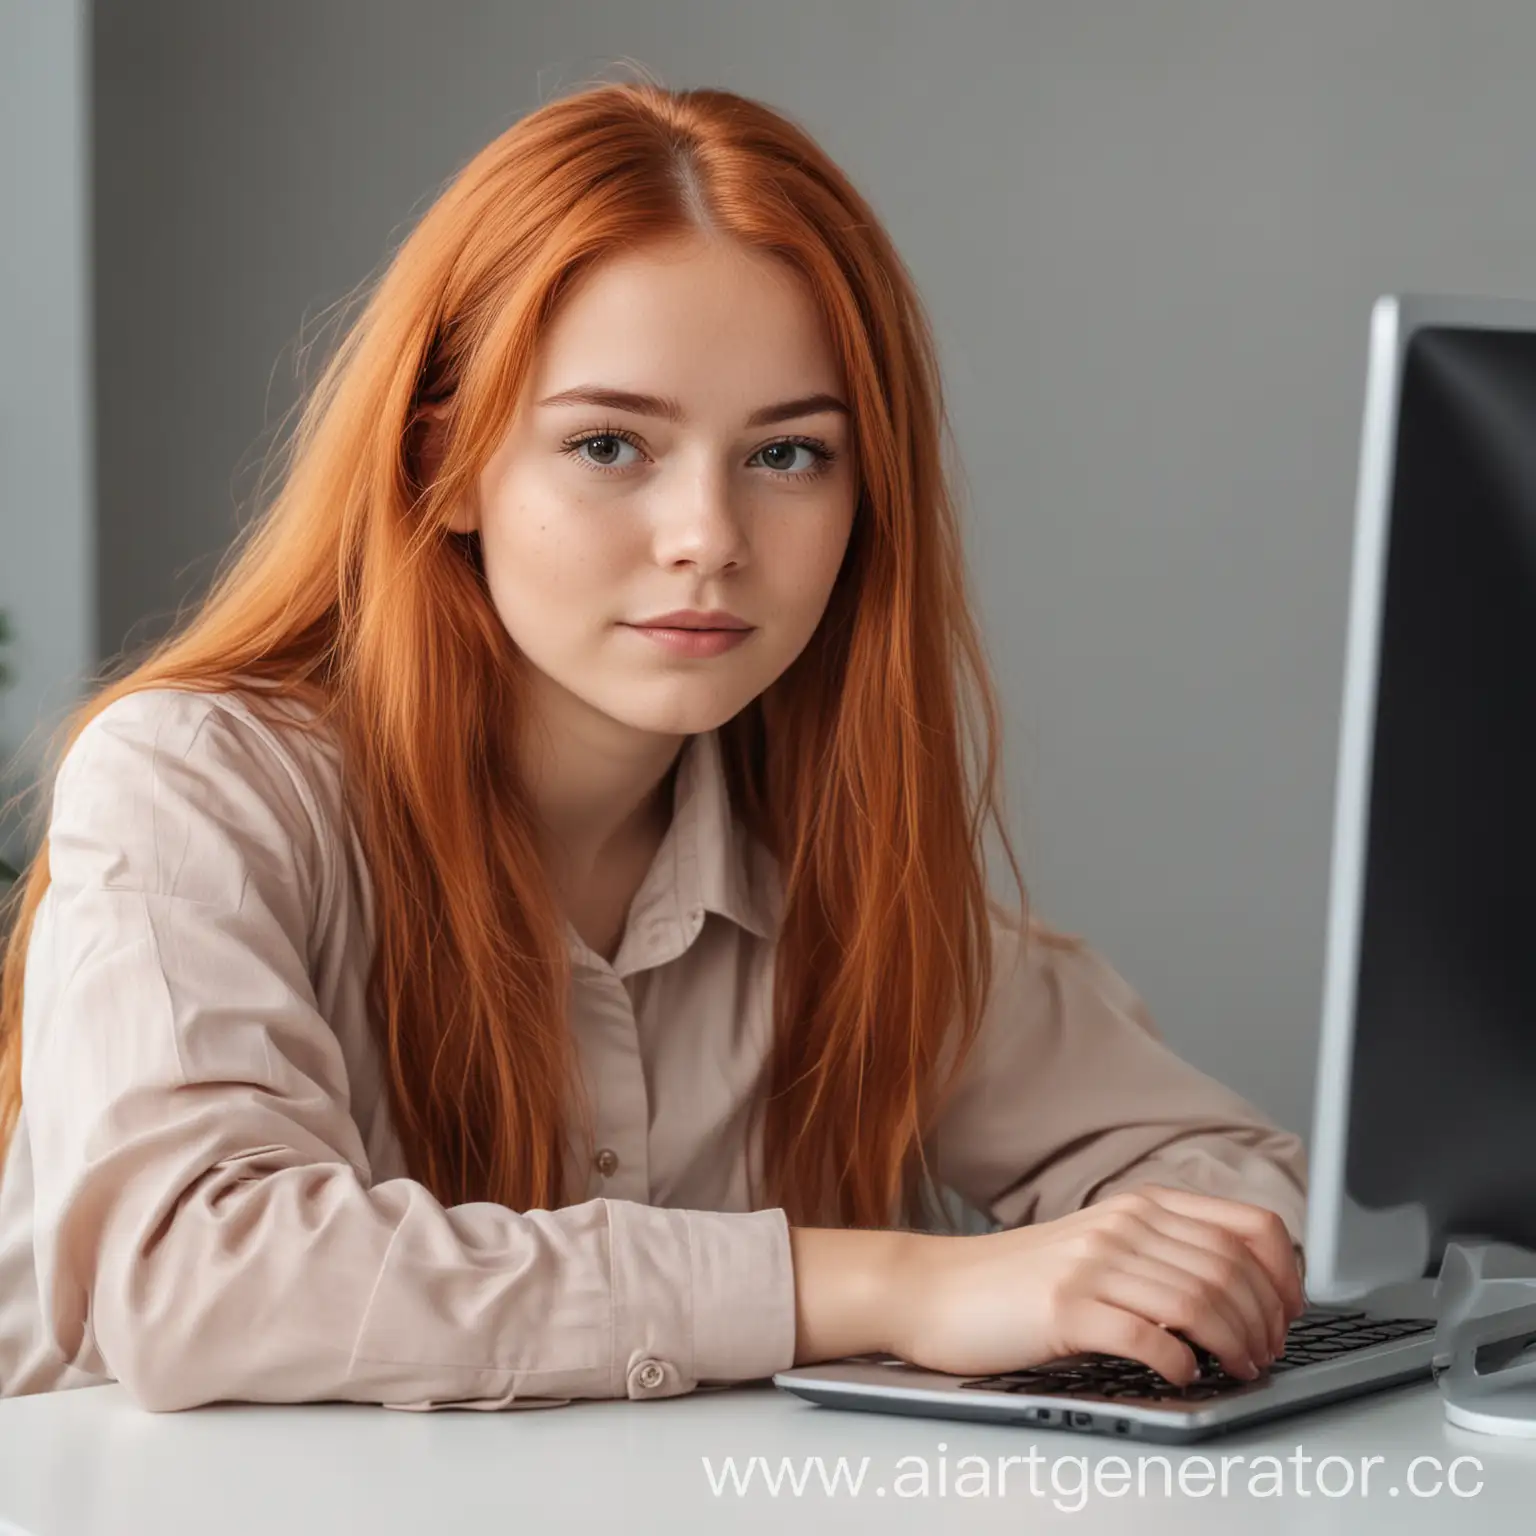 CopperHaired-Young-Product-Manager-Girl-Working-on-Computer